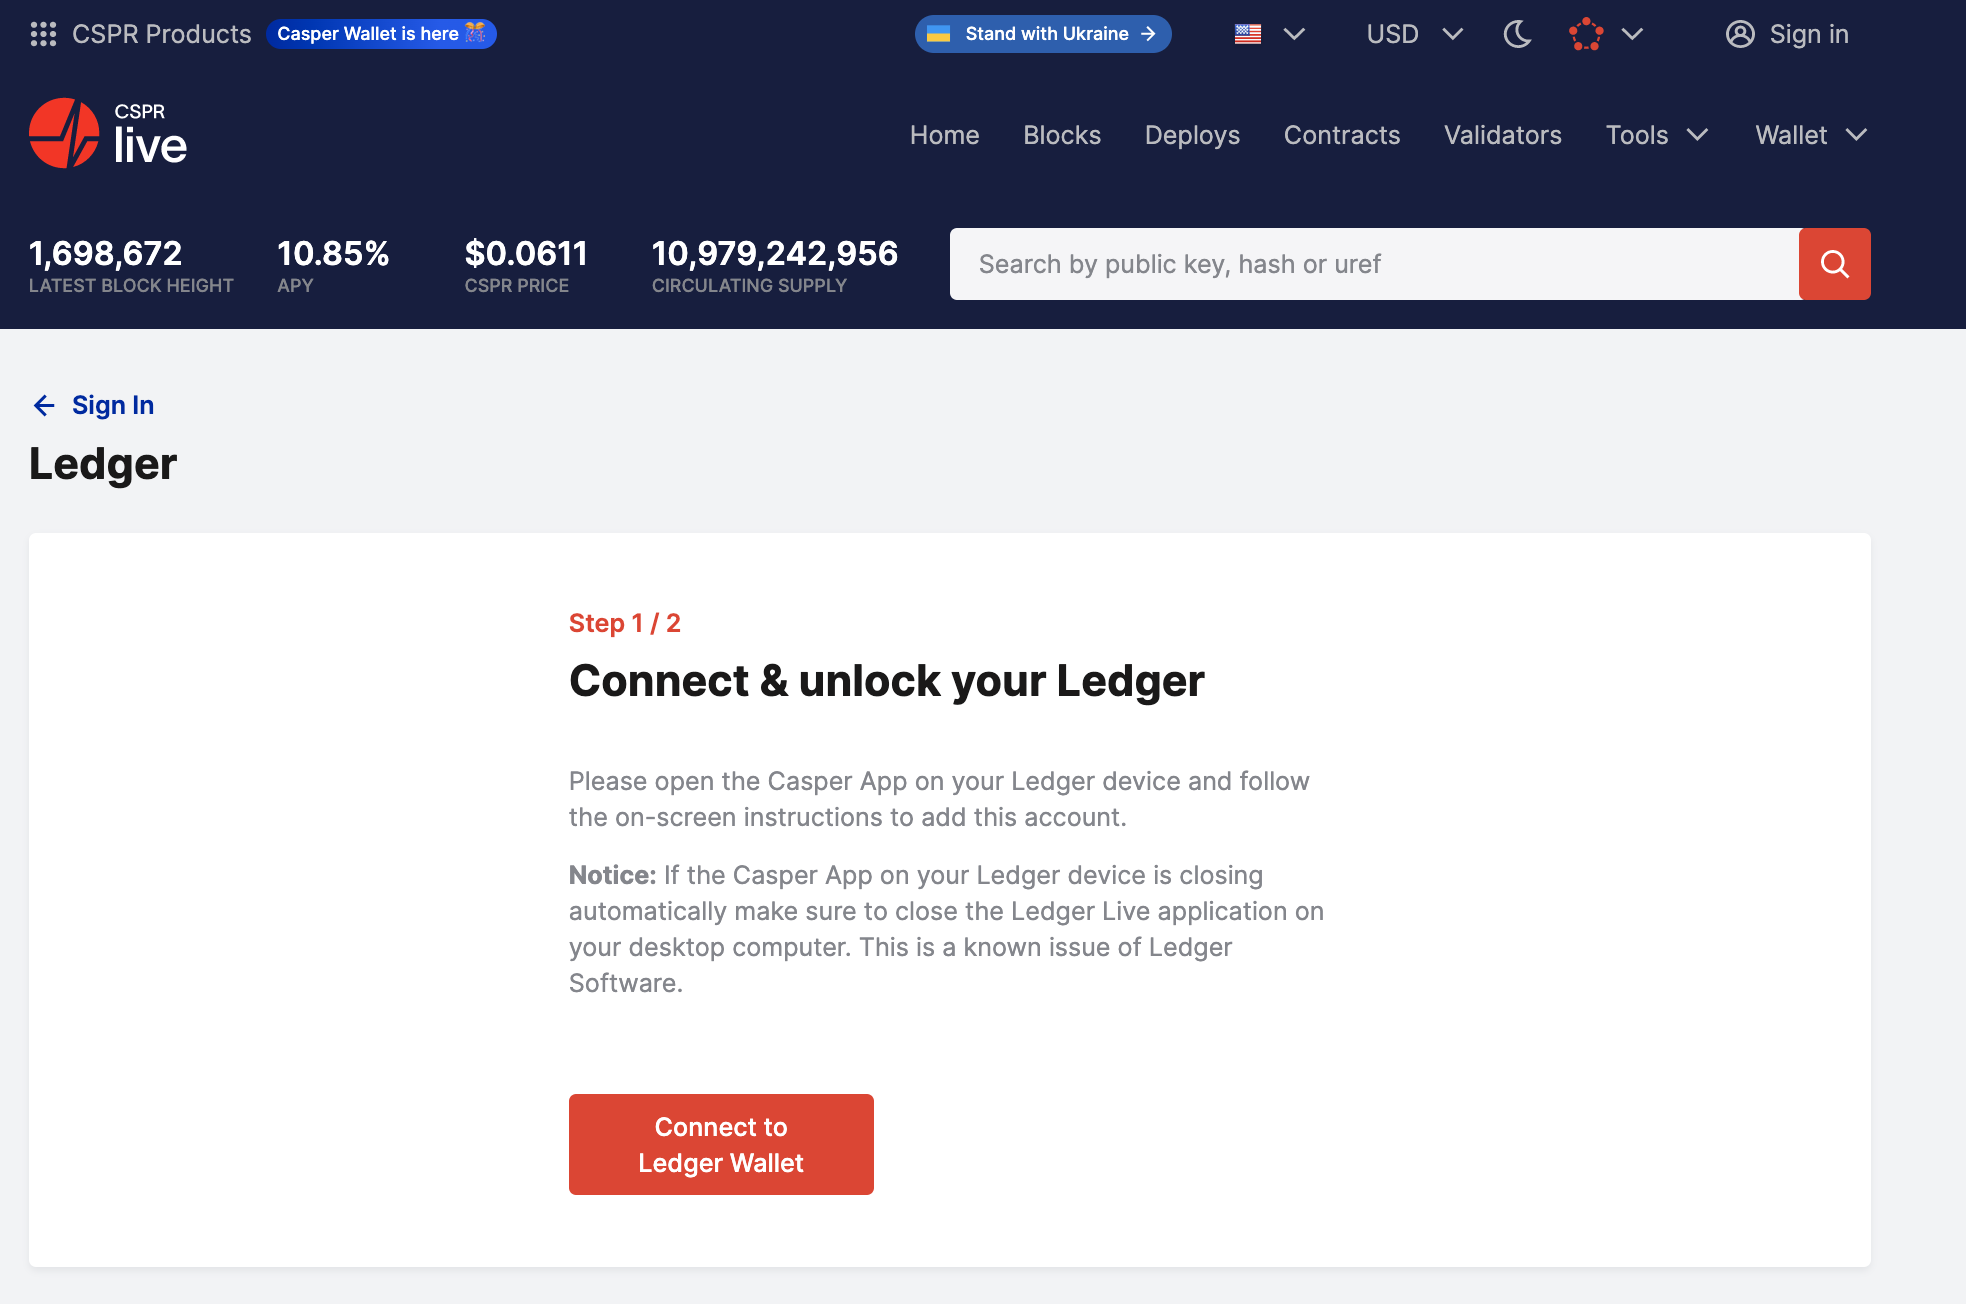 Connect to Ledger Wallet in CSPR Live